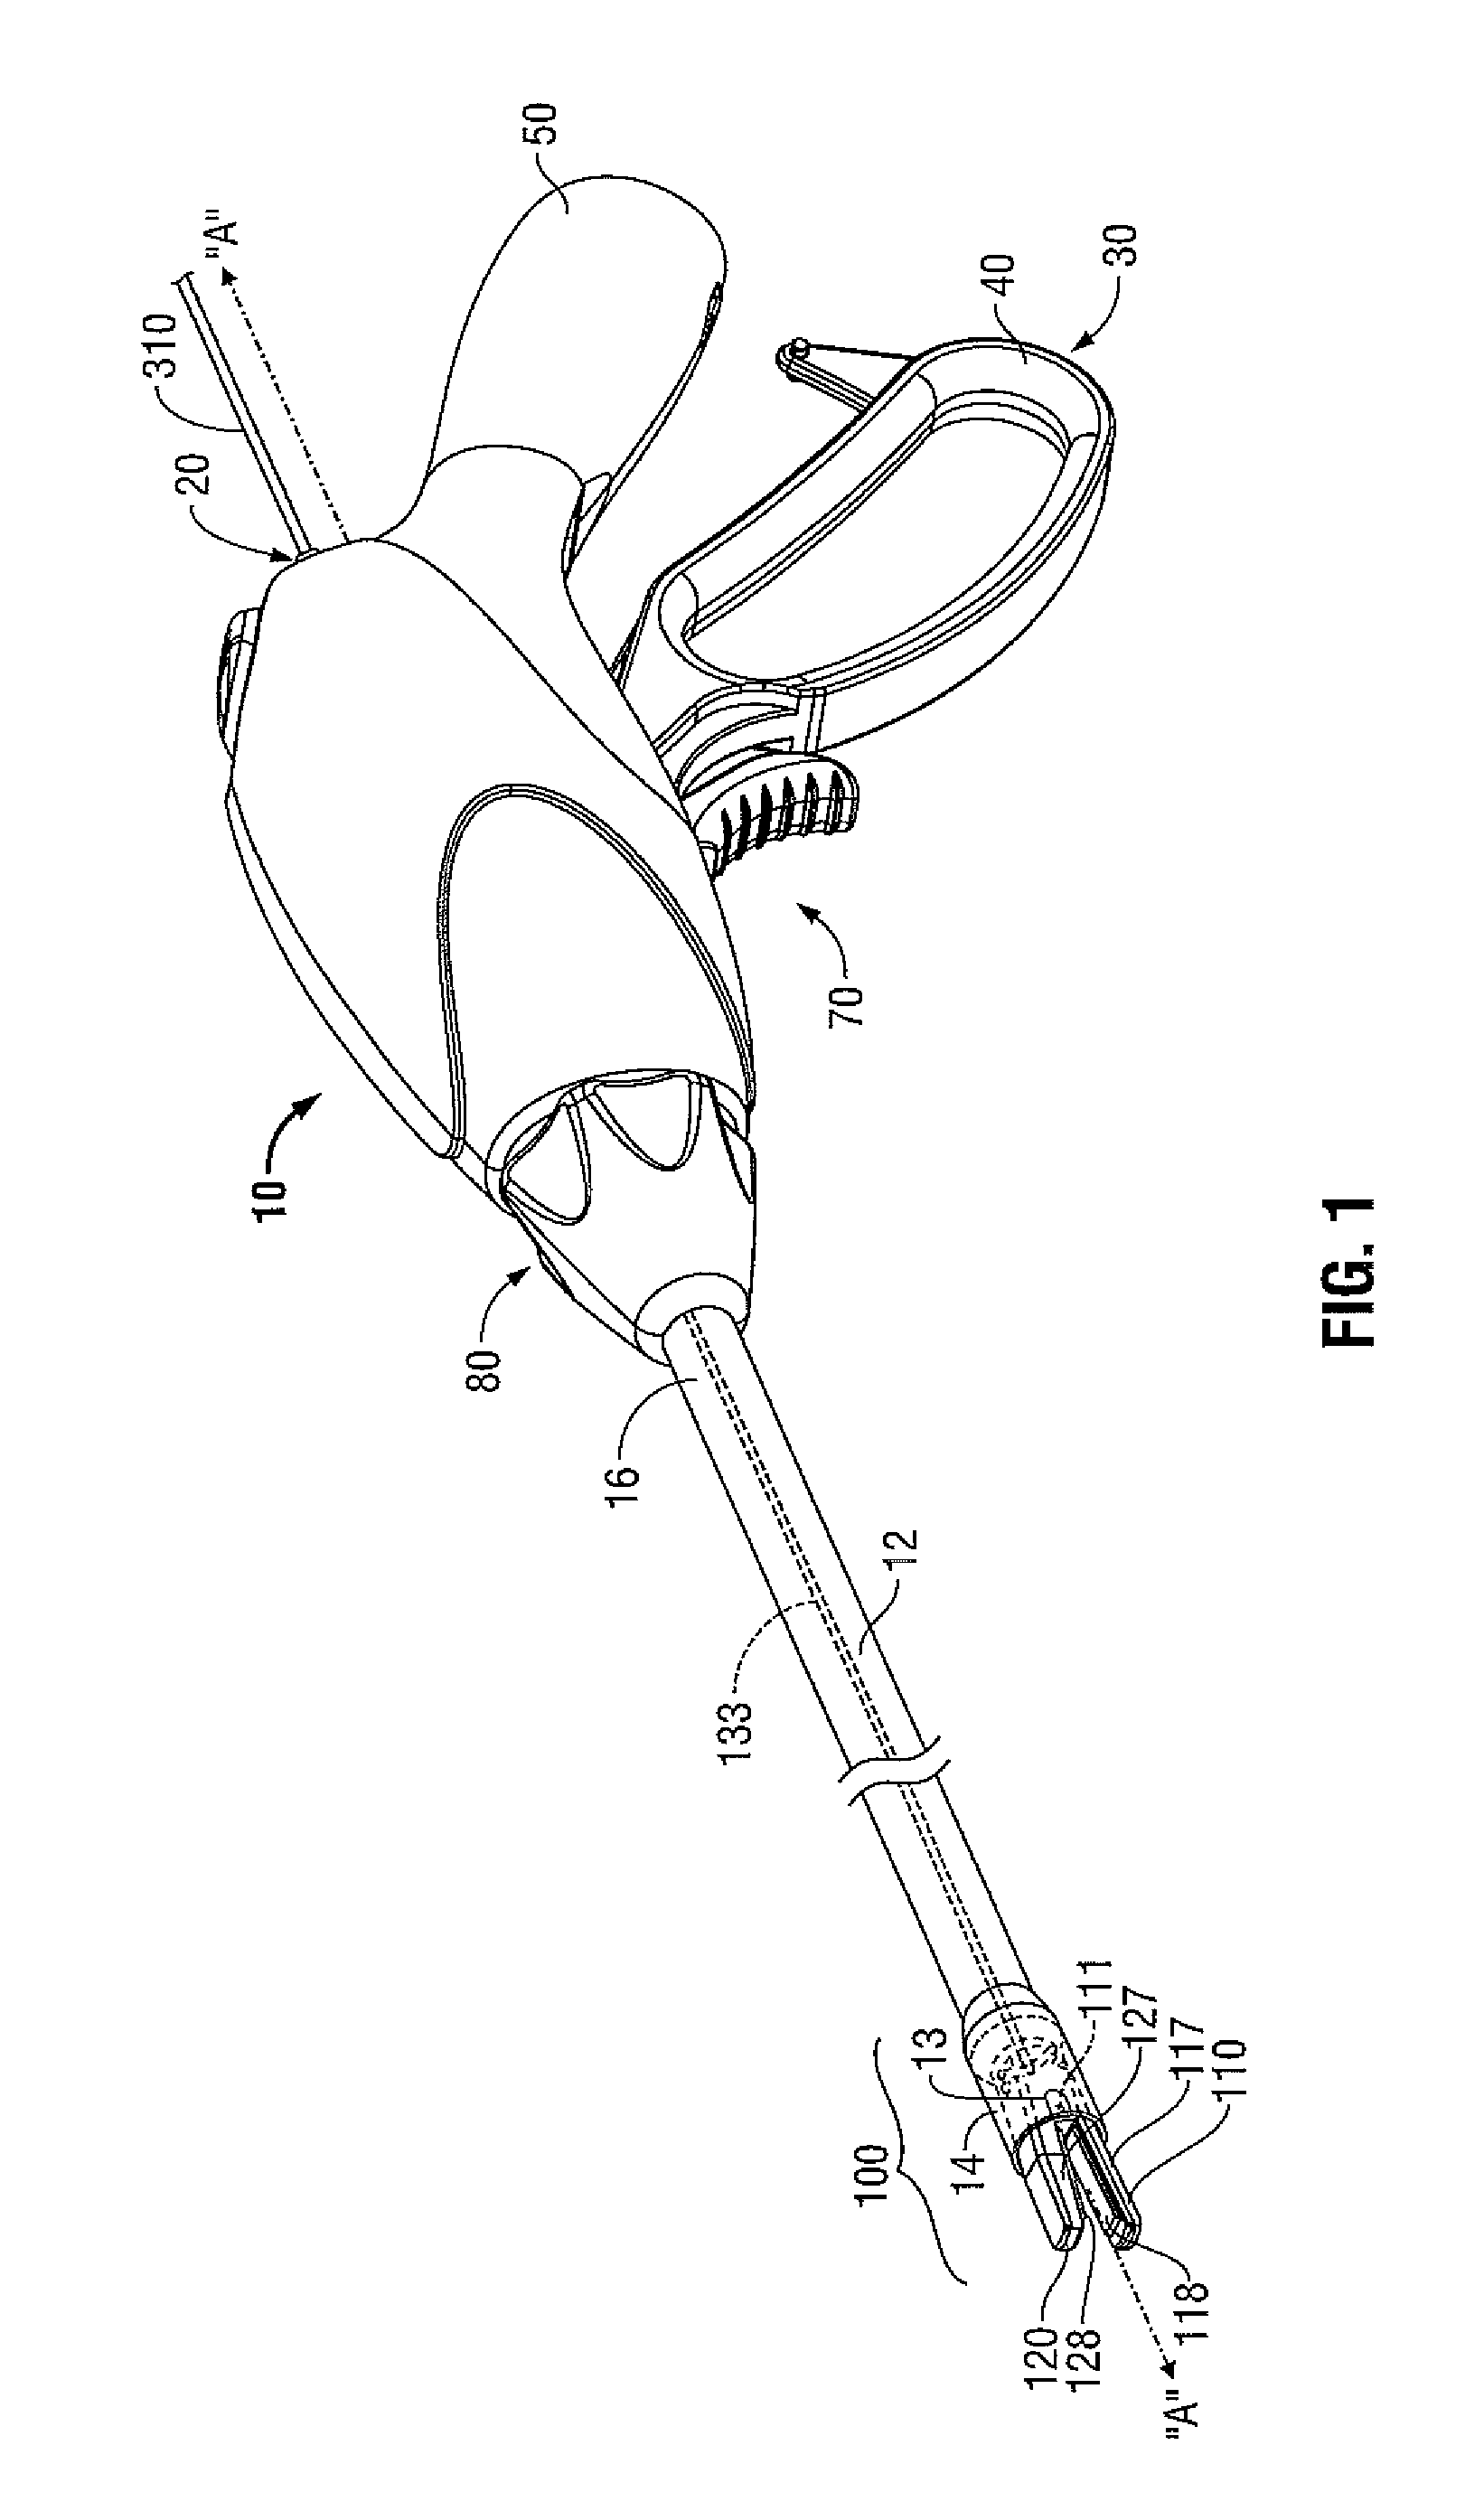 Apparatus for performing an electrosurgical procedure